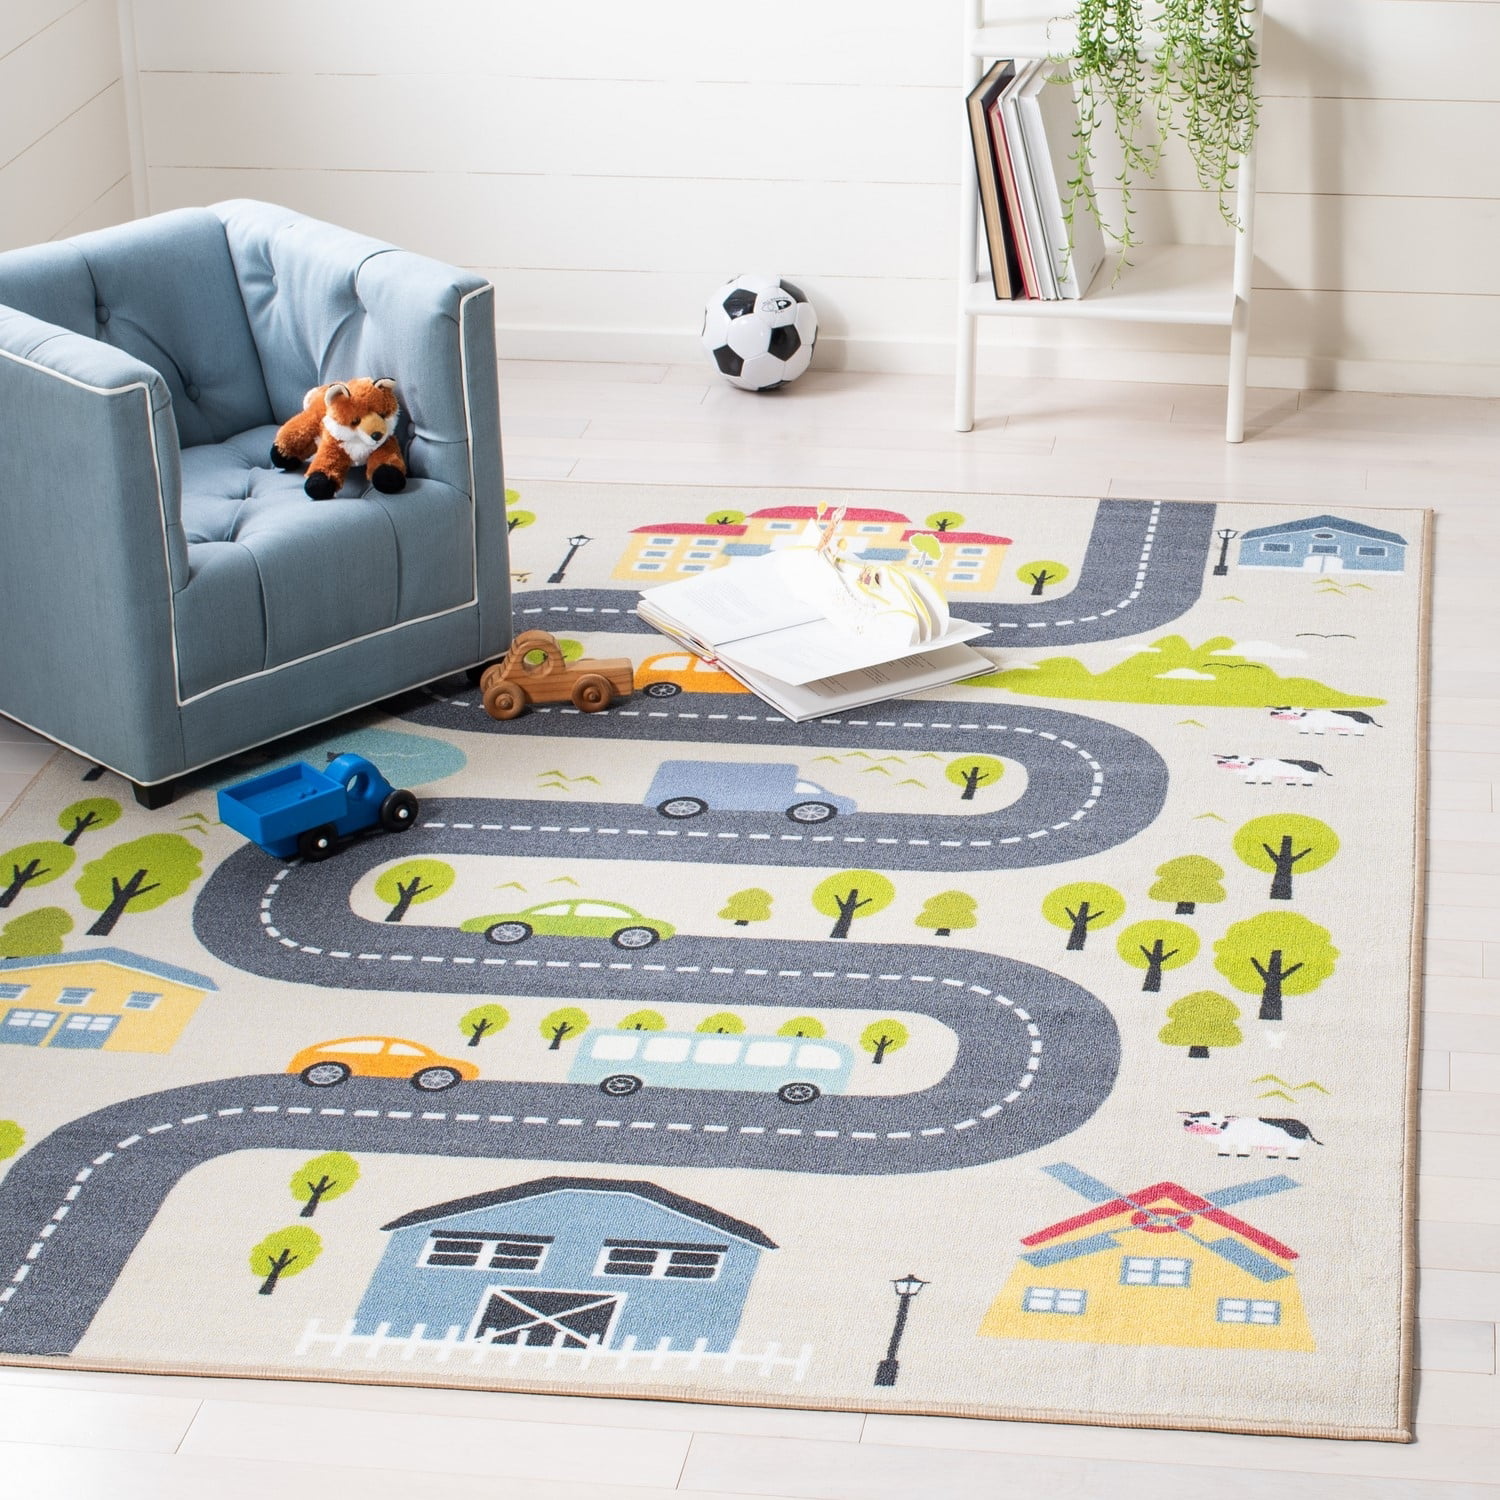 36.2 Inch Large Round Soft Area Rugs Cute Dinosaurs Pattern Nursery Playmat Rug Mat for Kids Playing Room Bedroom Living Room Home Decorative Rug